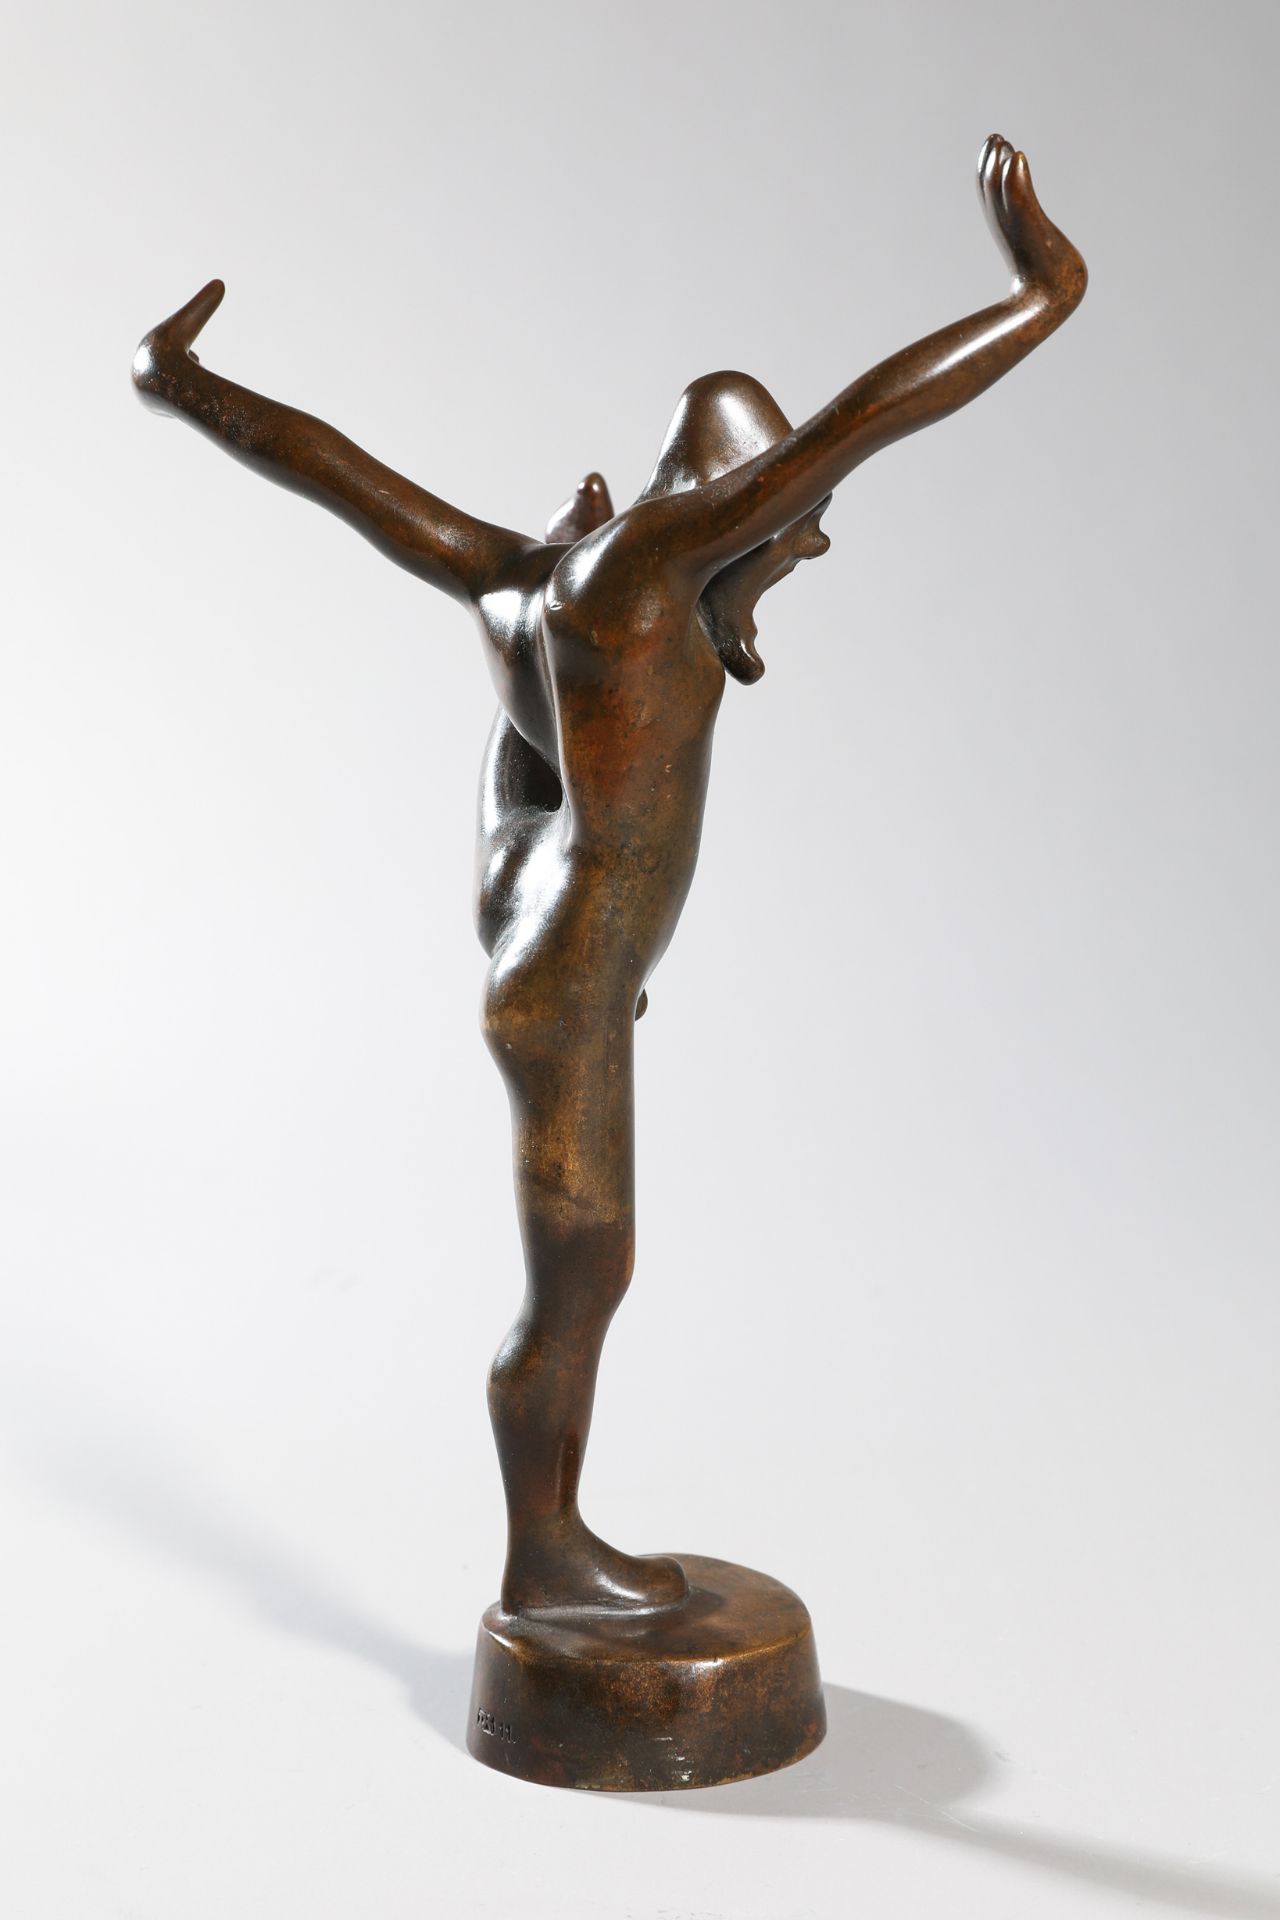 Jean René Gauguin, Dancer with outstretched leg - Image 5 of 6